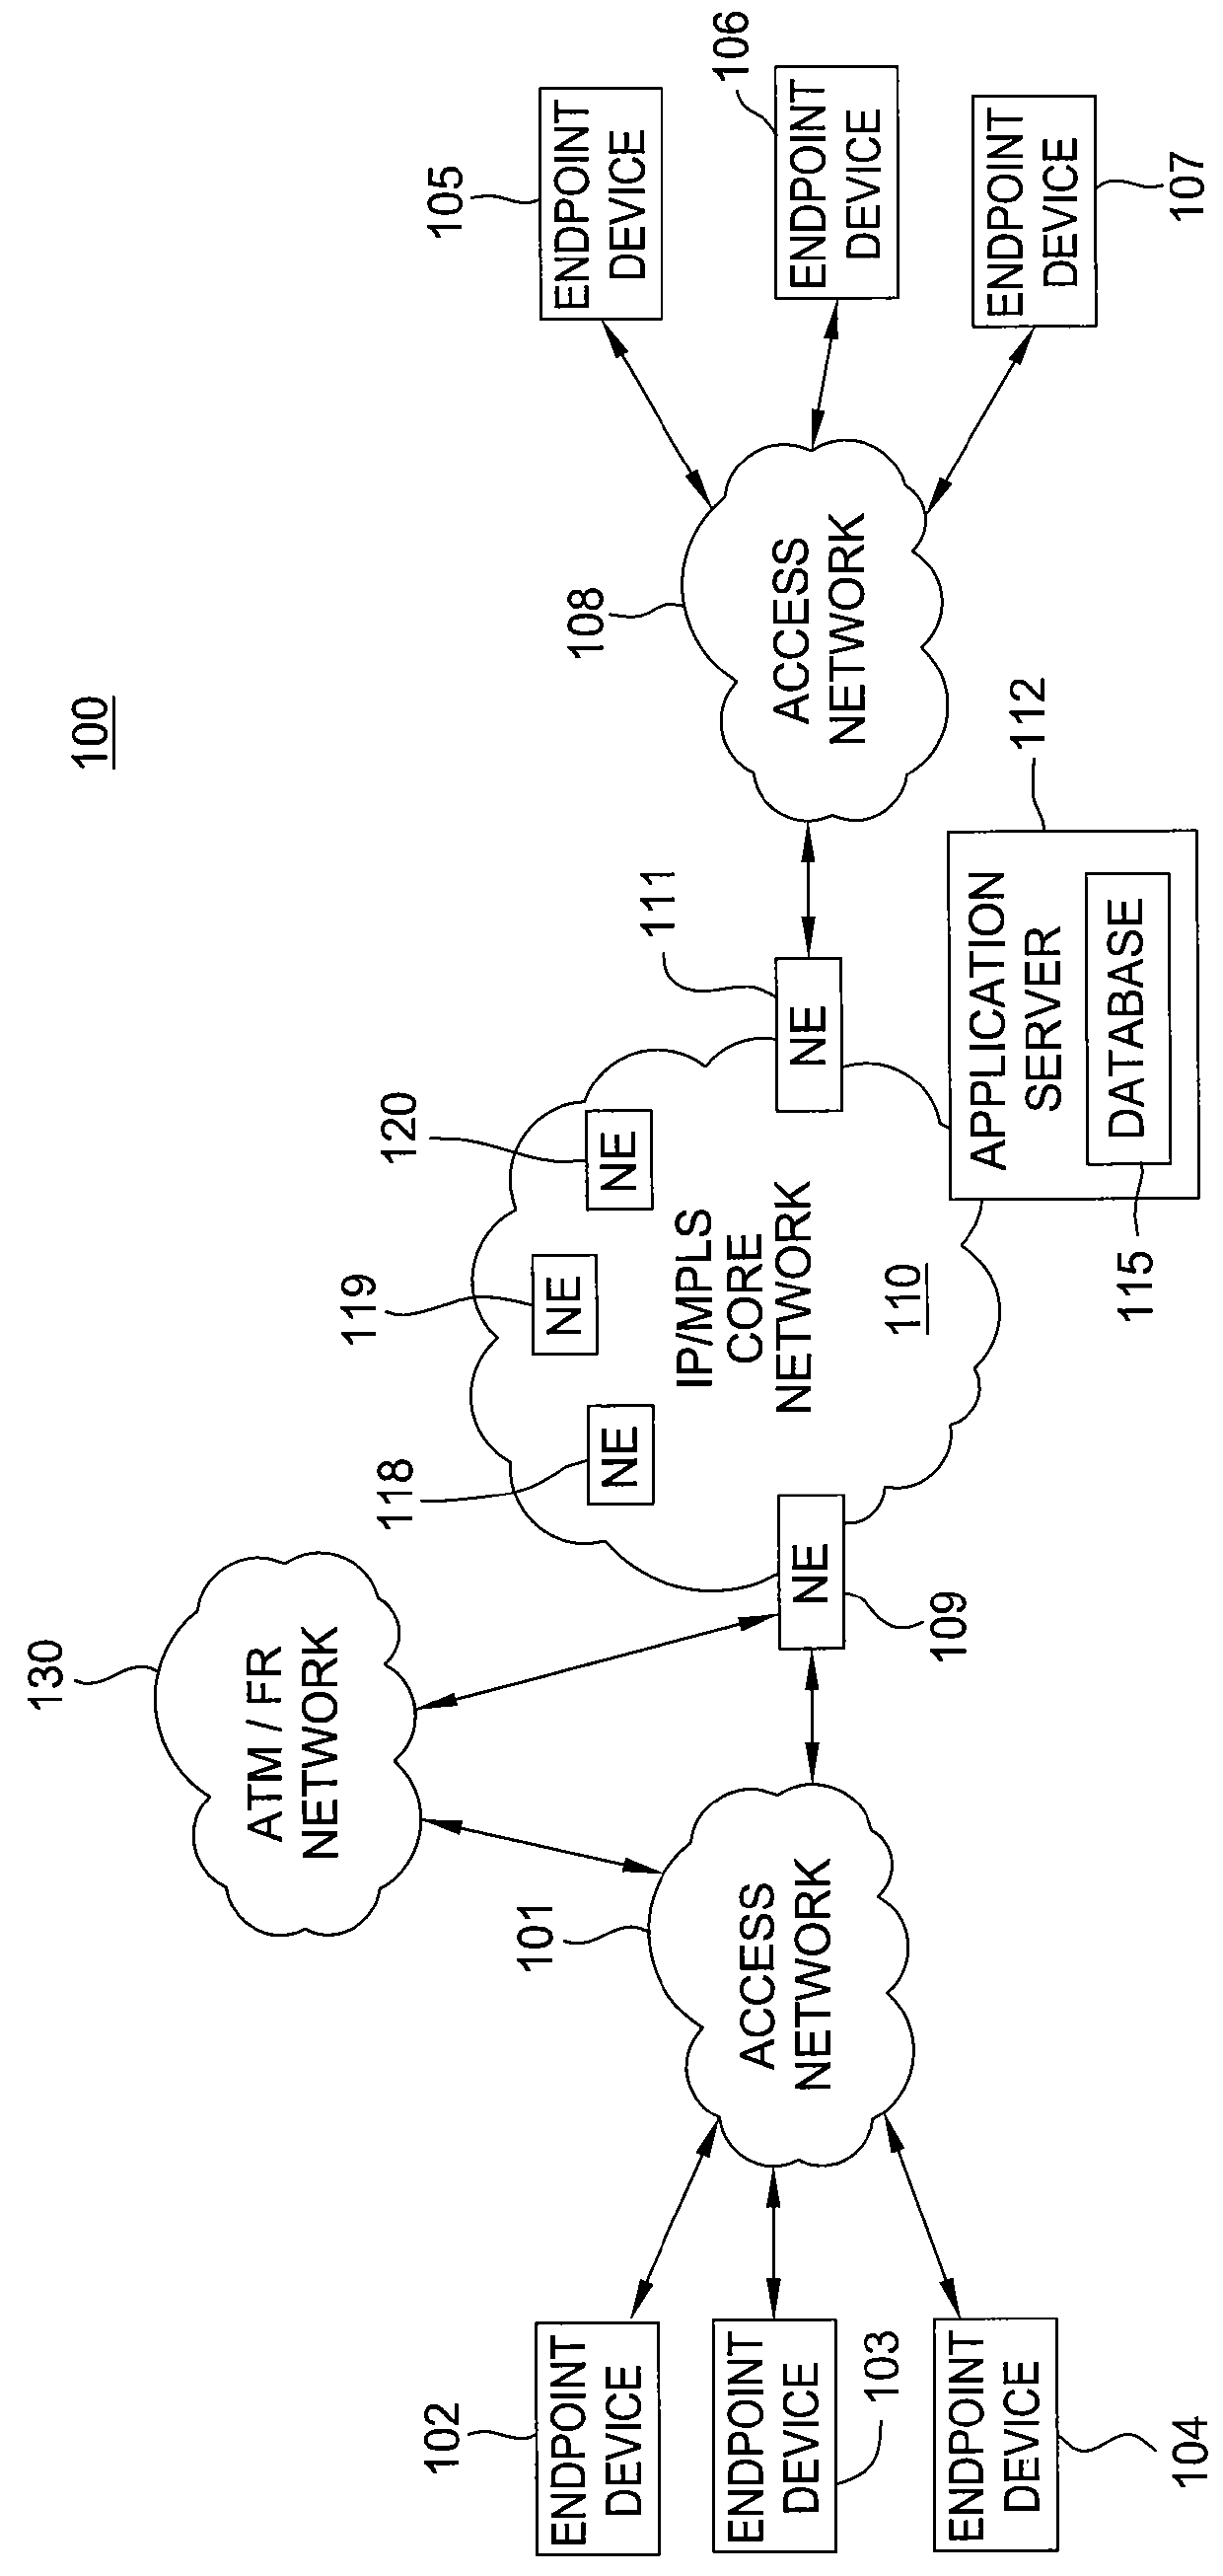 Method and apparatus for providing mapping data